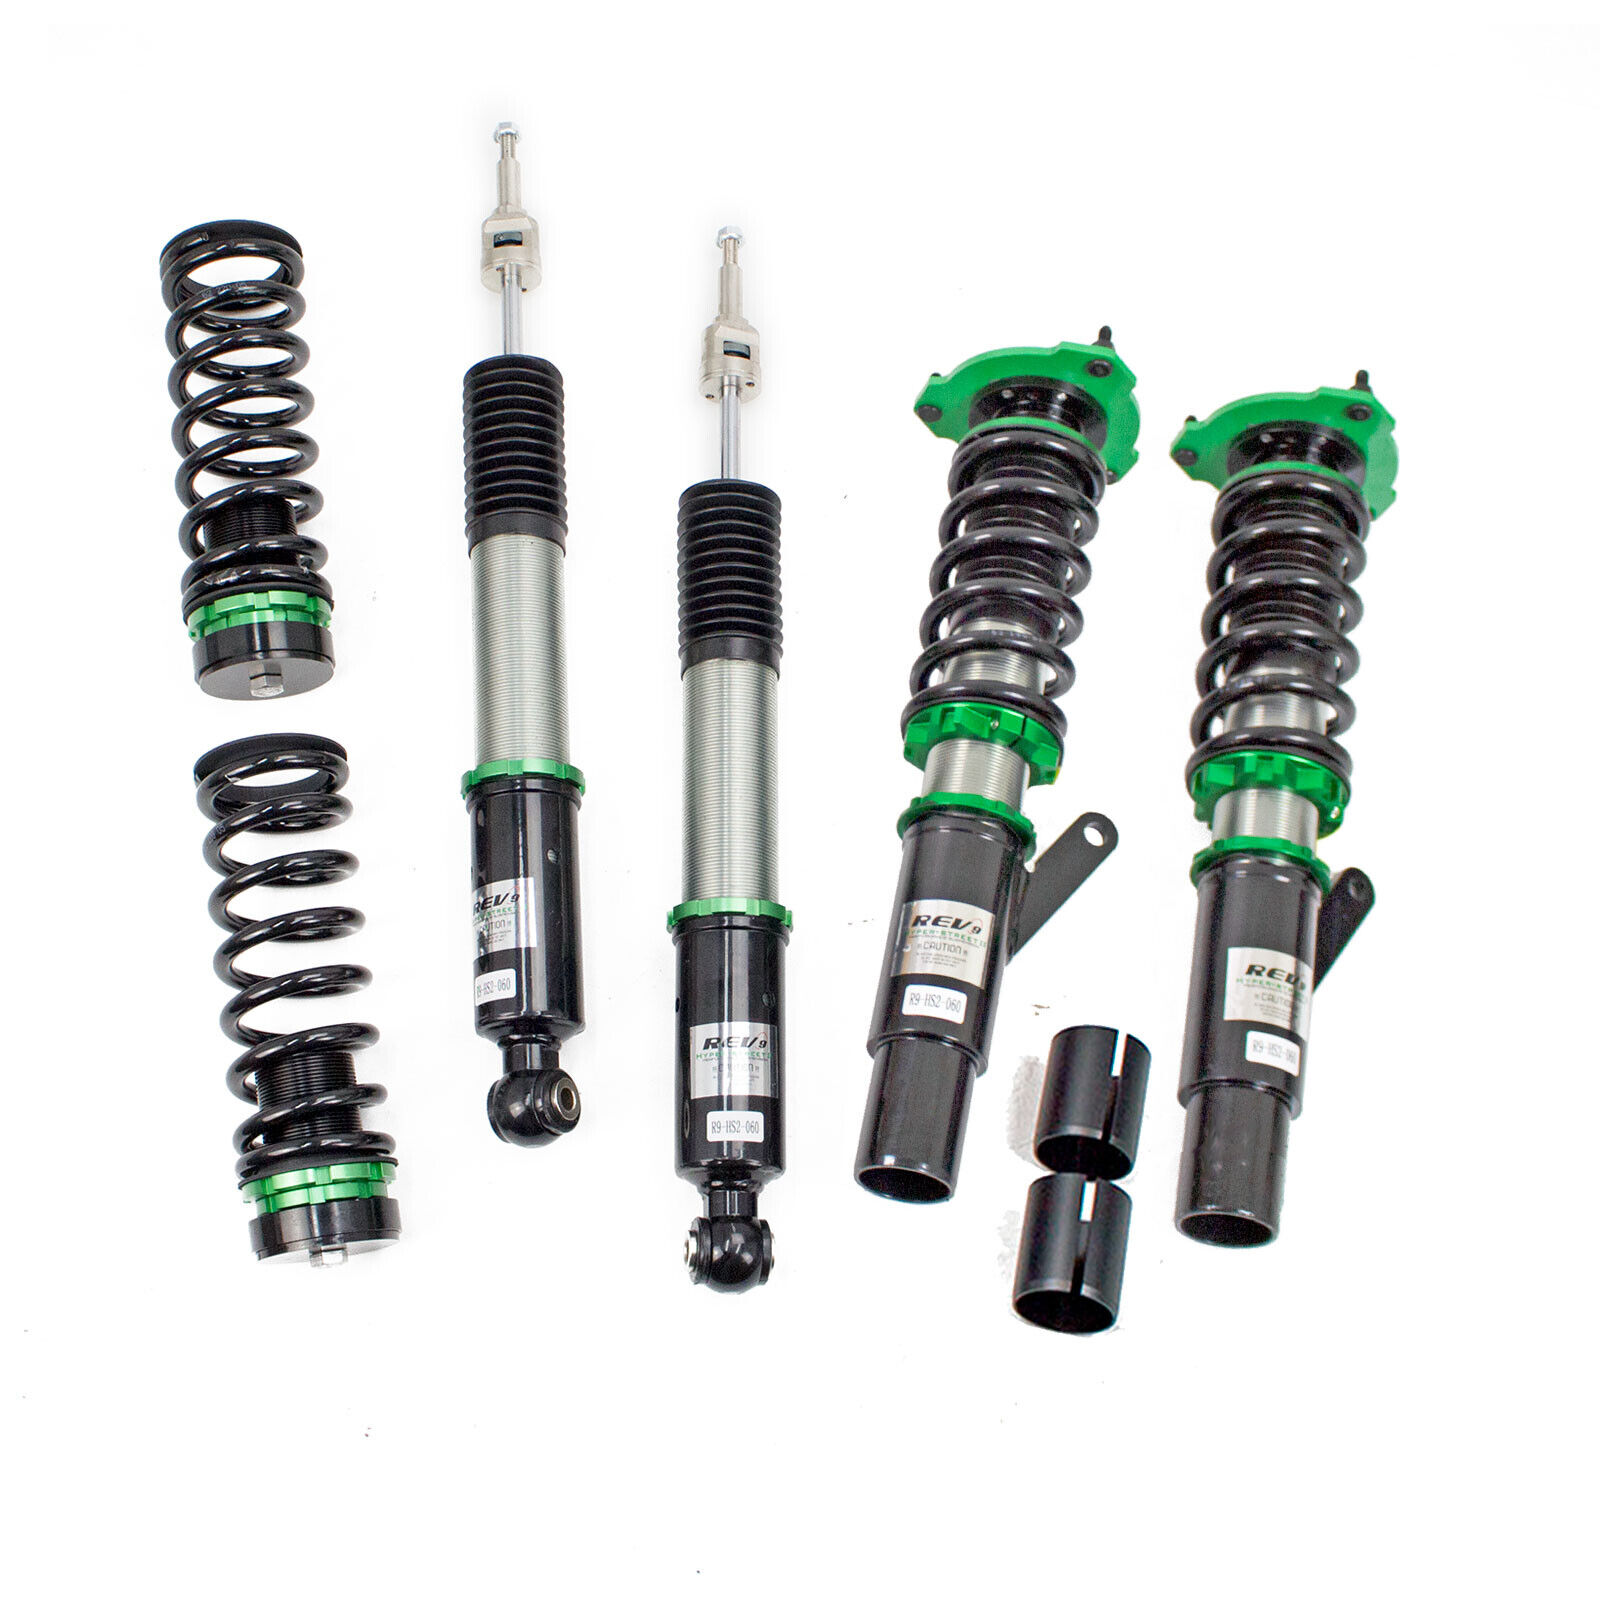 Rev9 For Beetle R-Line (A6) 2013-17 Hyper-Street II Coilover Kit w/ 32-Way